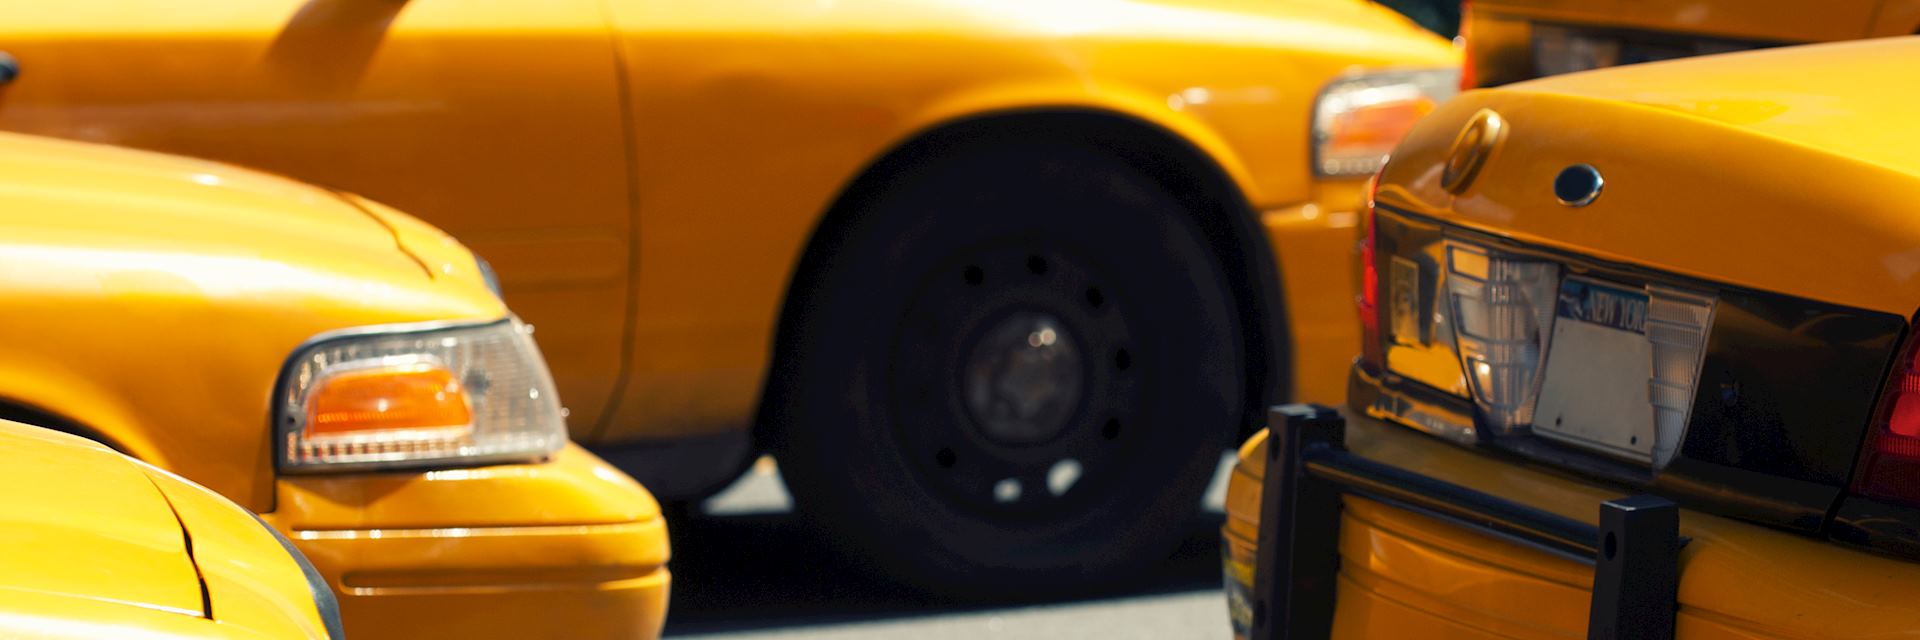 Yellow taxis, New York